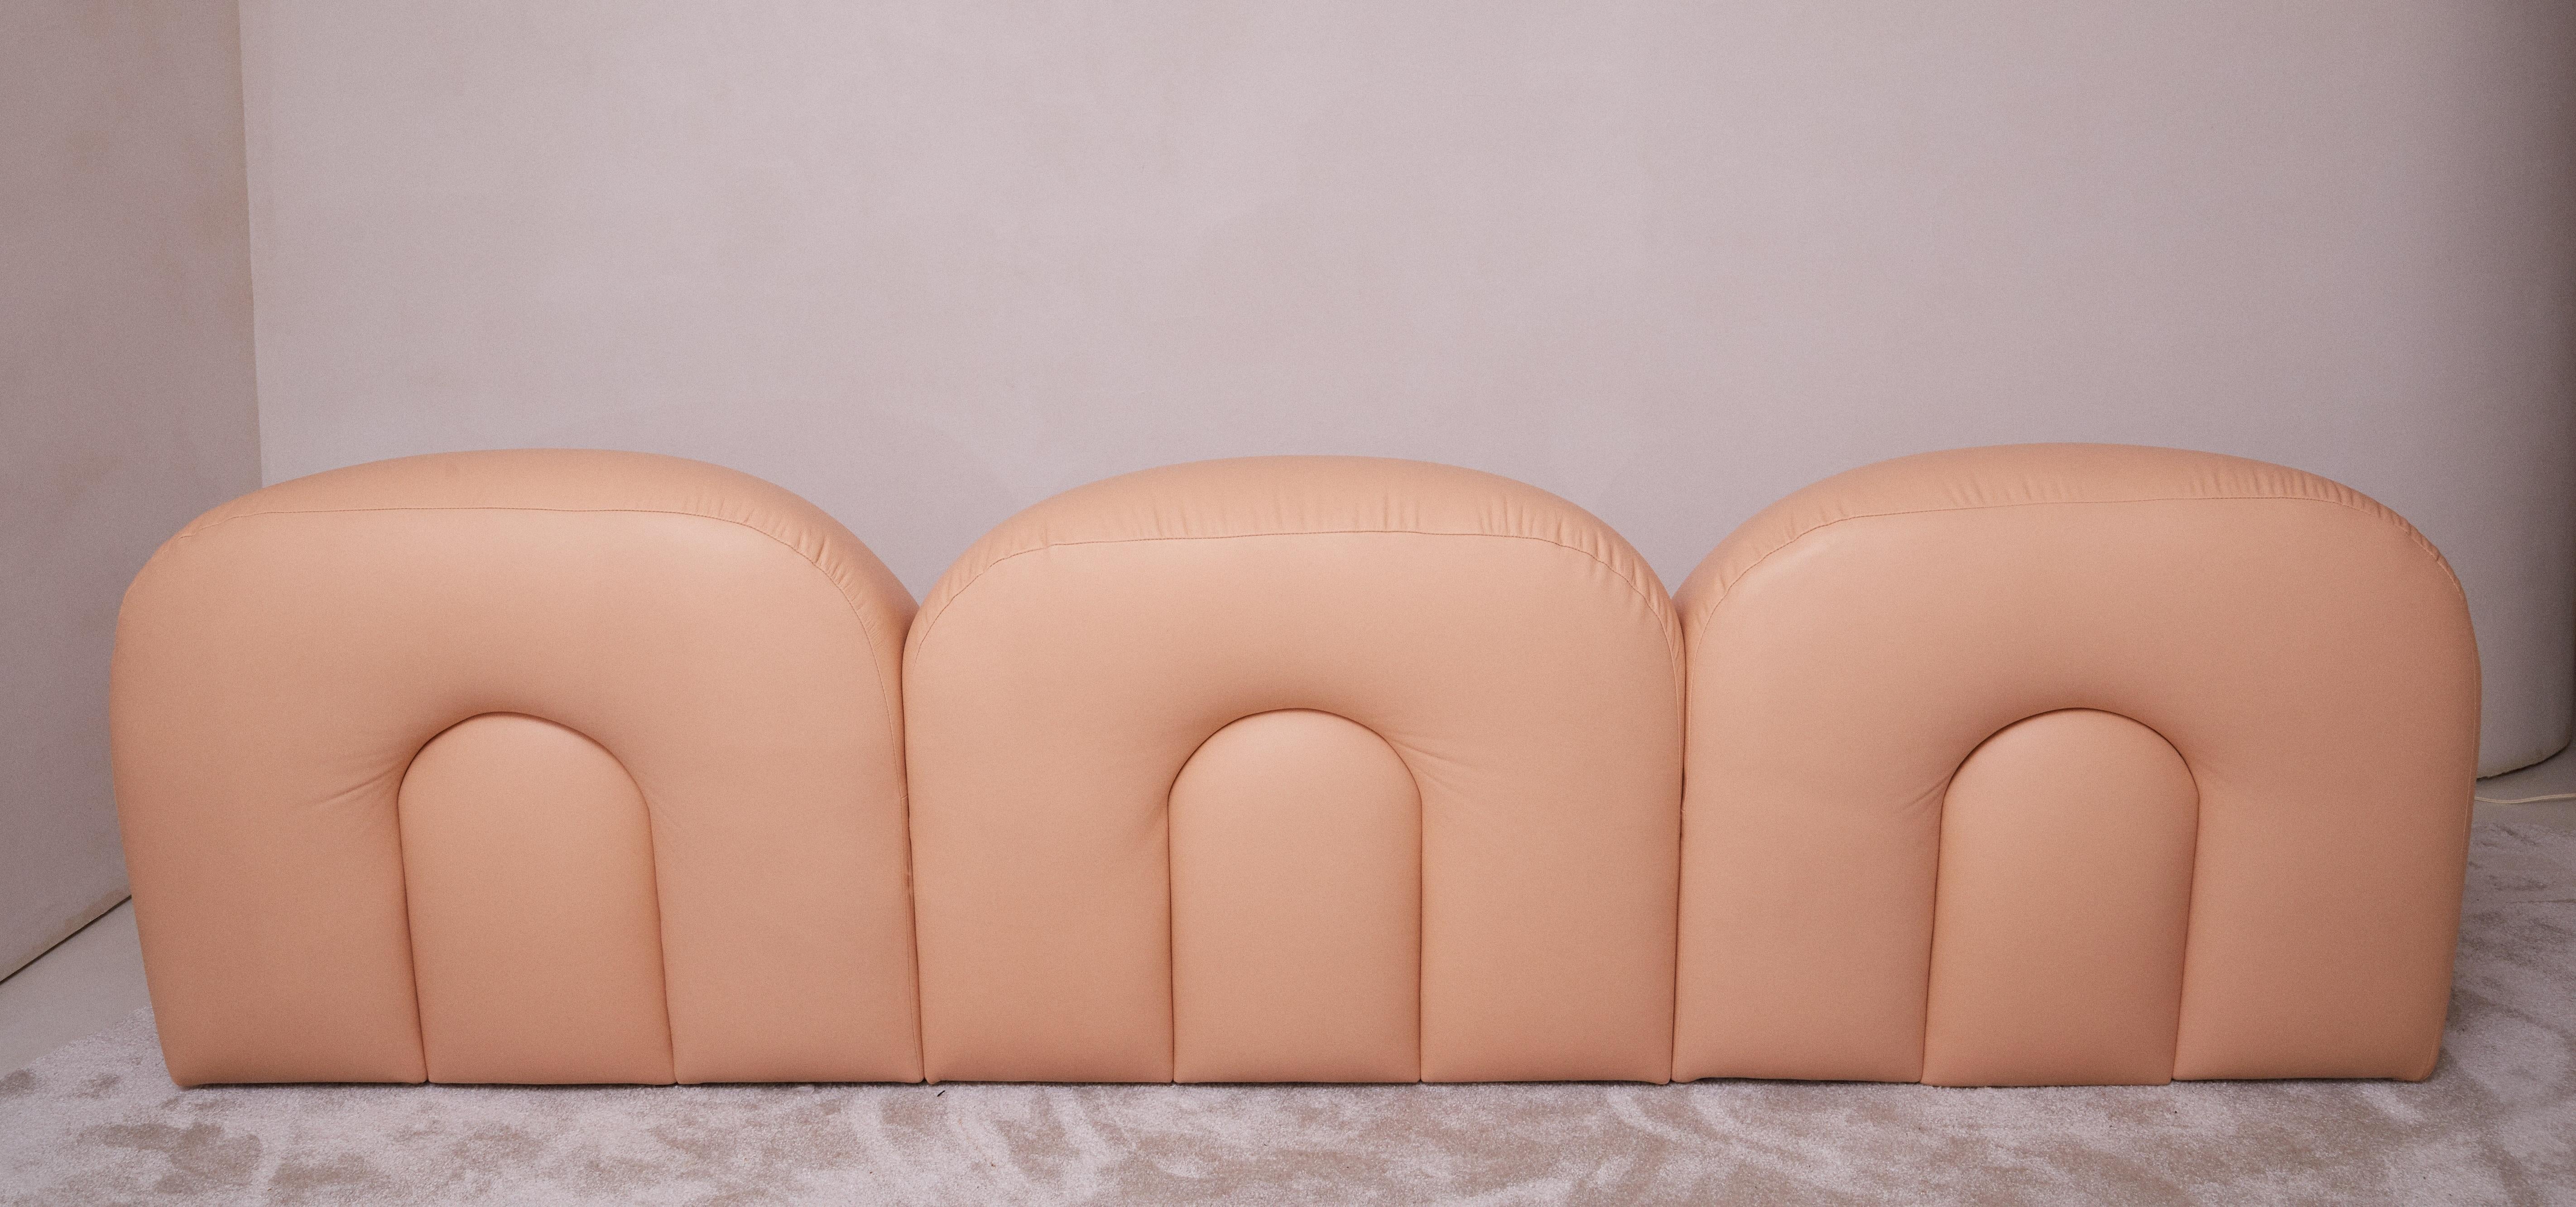 Spanish Inflatable Sofa by Patricia Bustos de la Torre For Sale